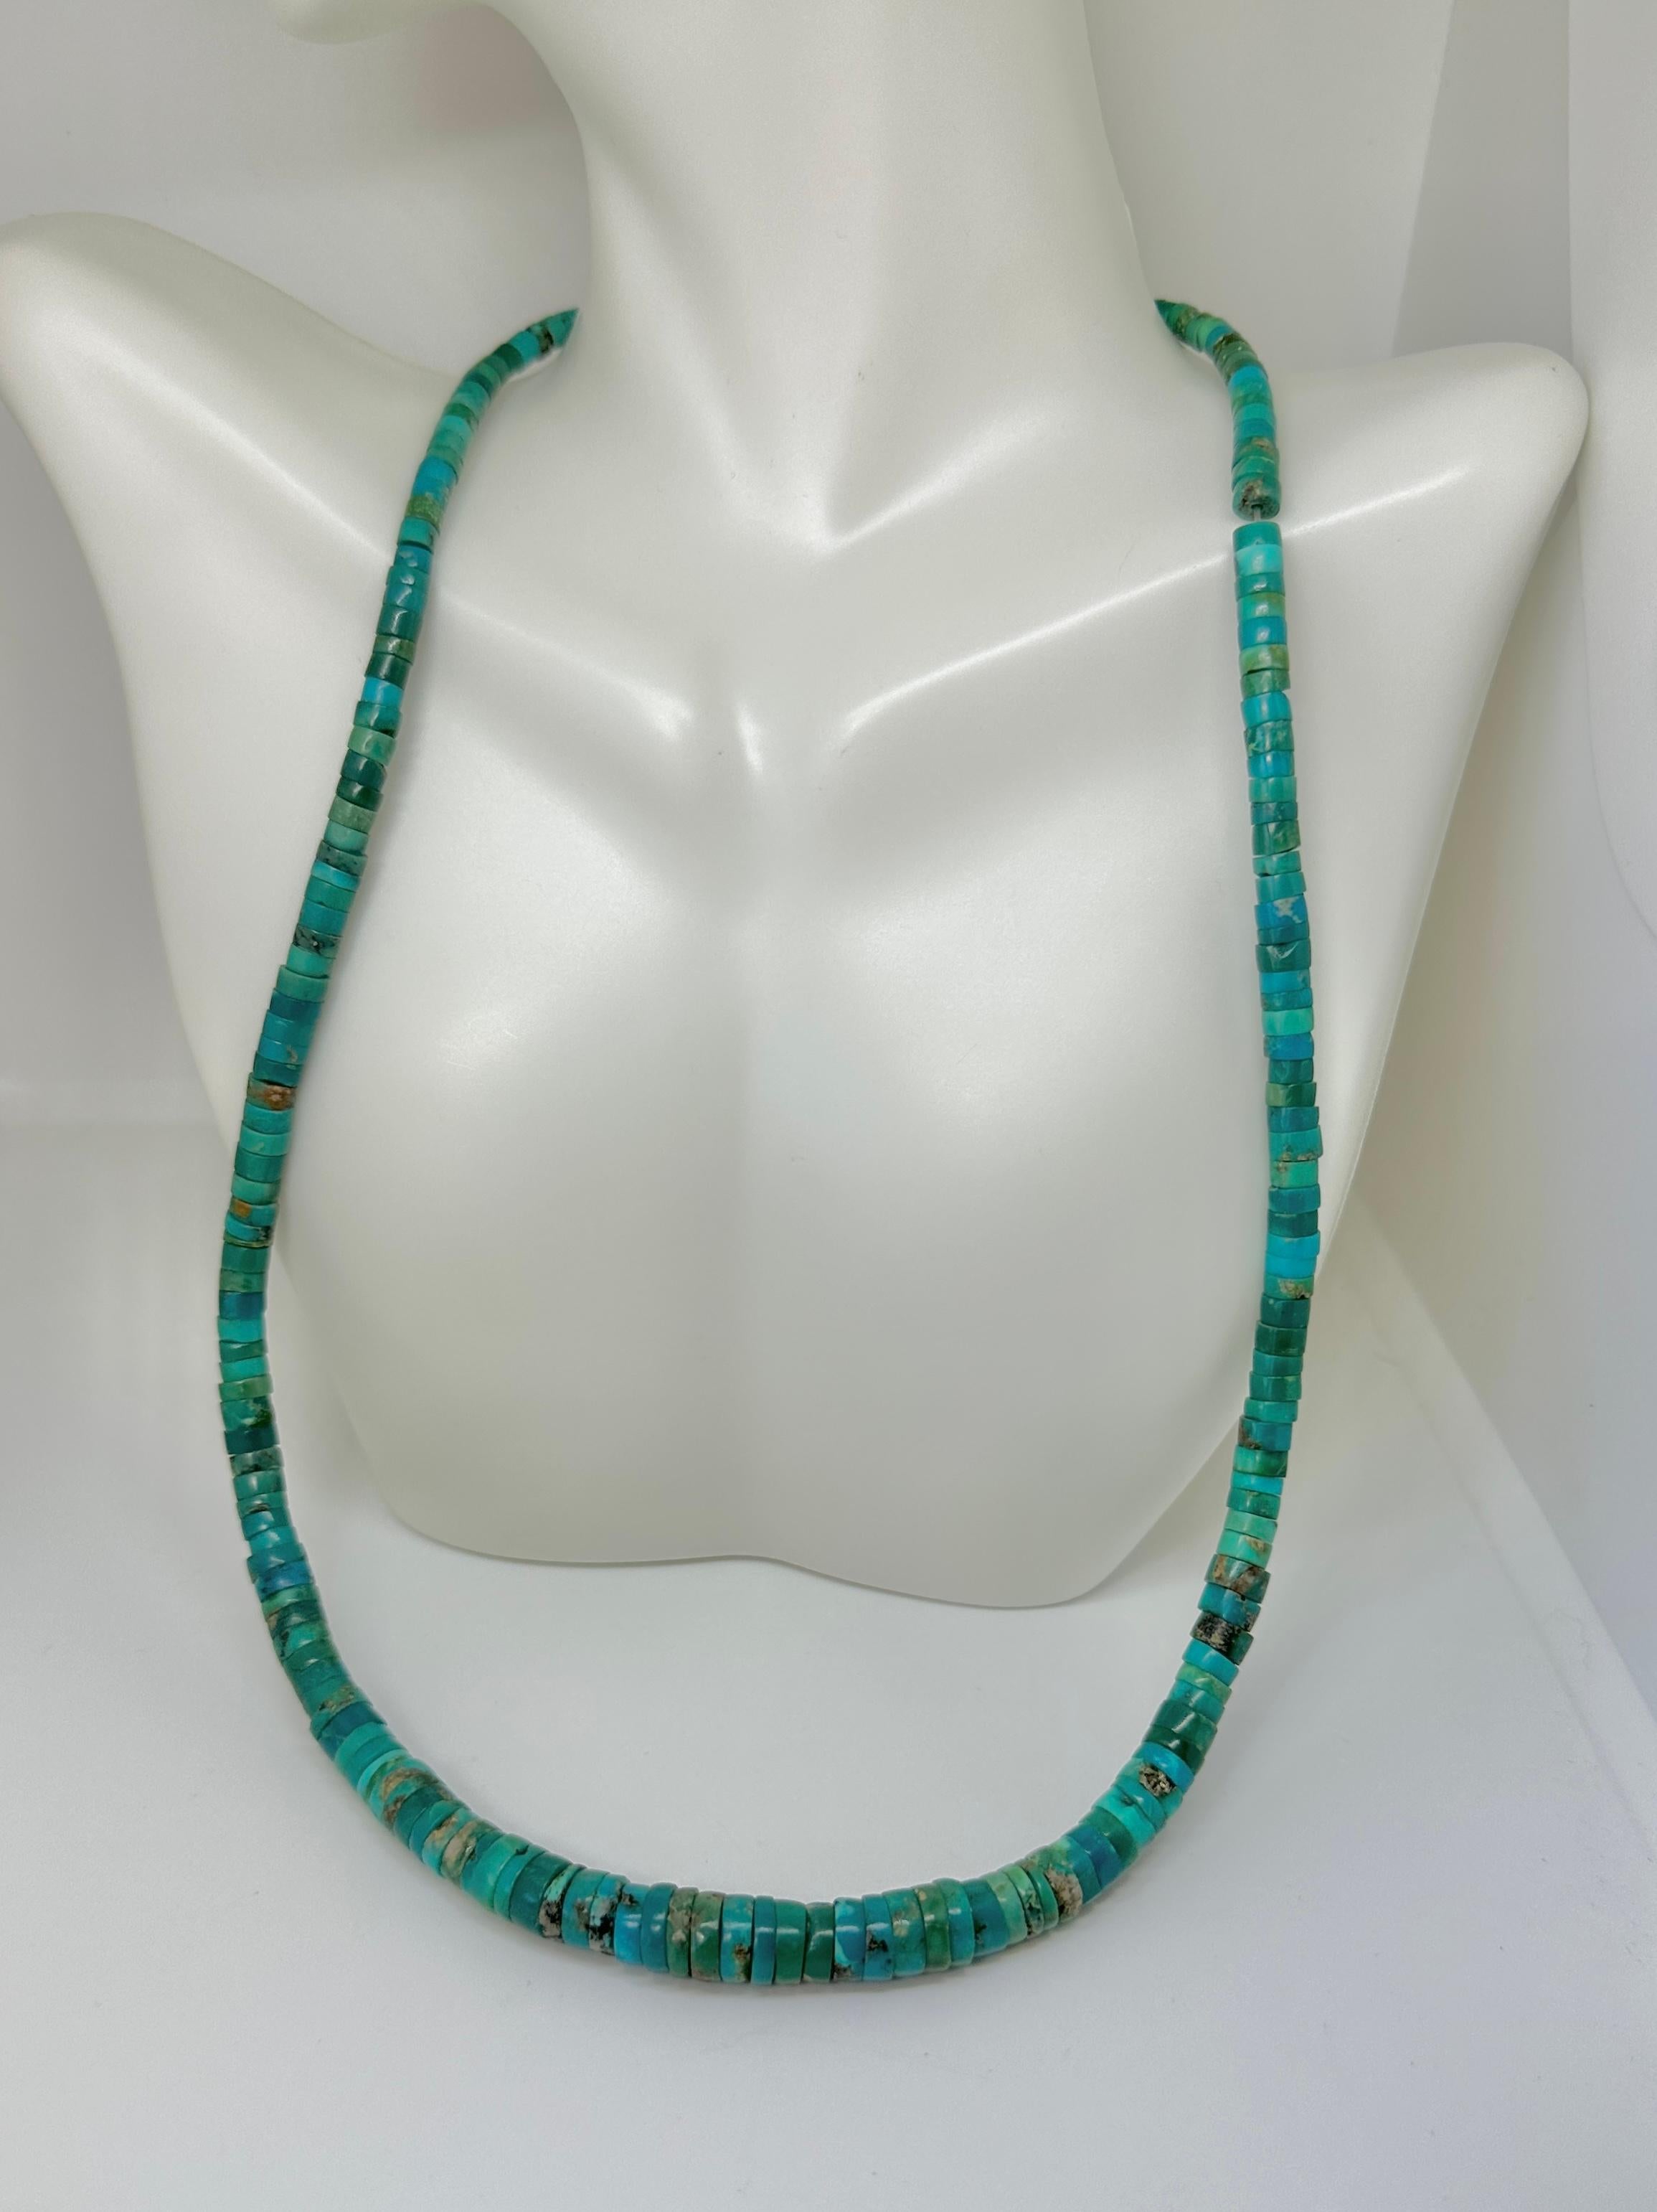 Early Santo Domingo Pueblo Greasy Caribbean Blue Green Heishi Turquoise Necklace In Excellent Condition For Sale In New York, NY